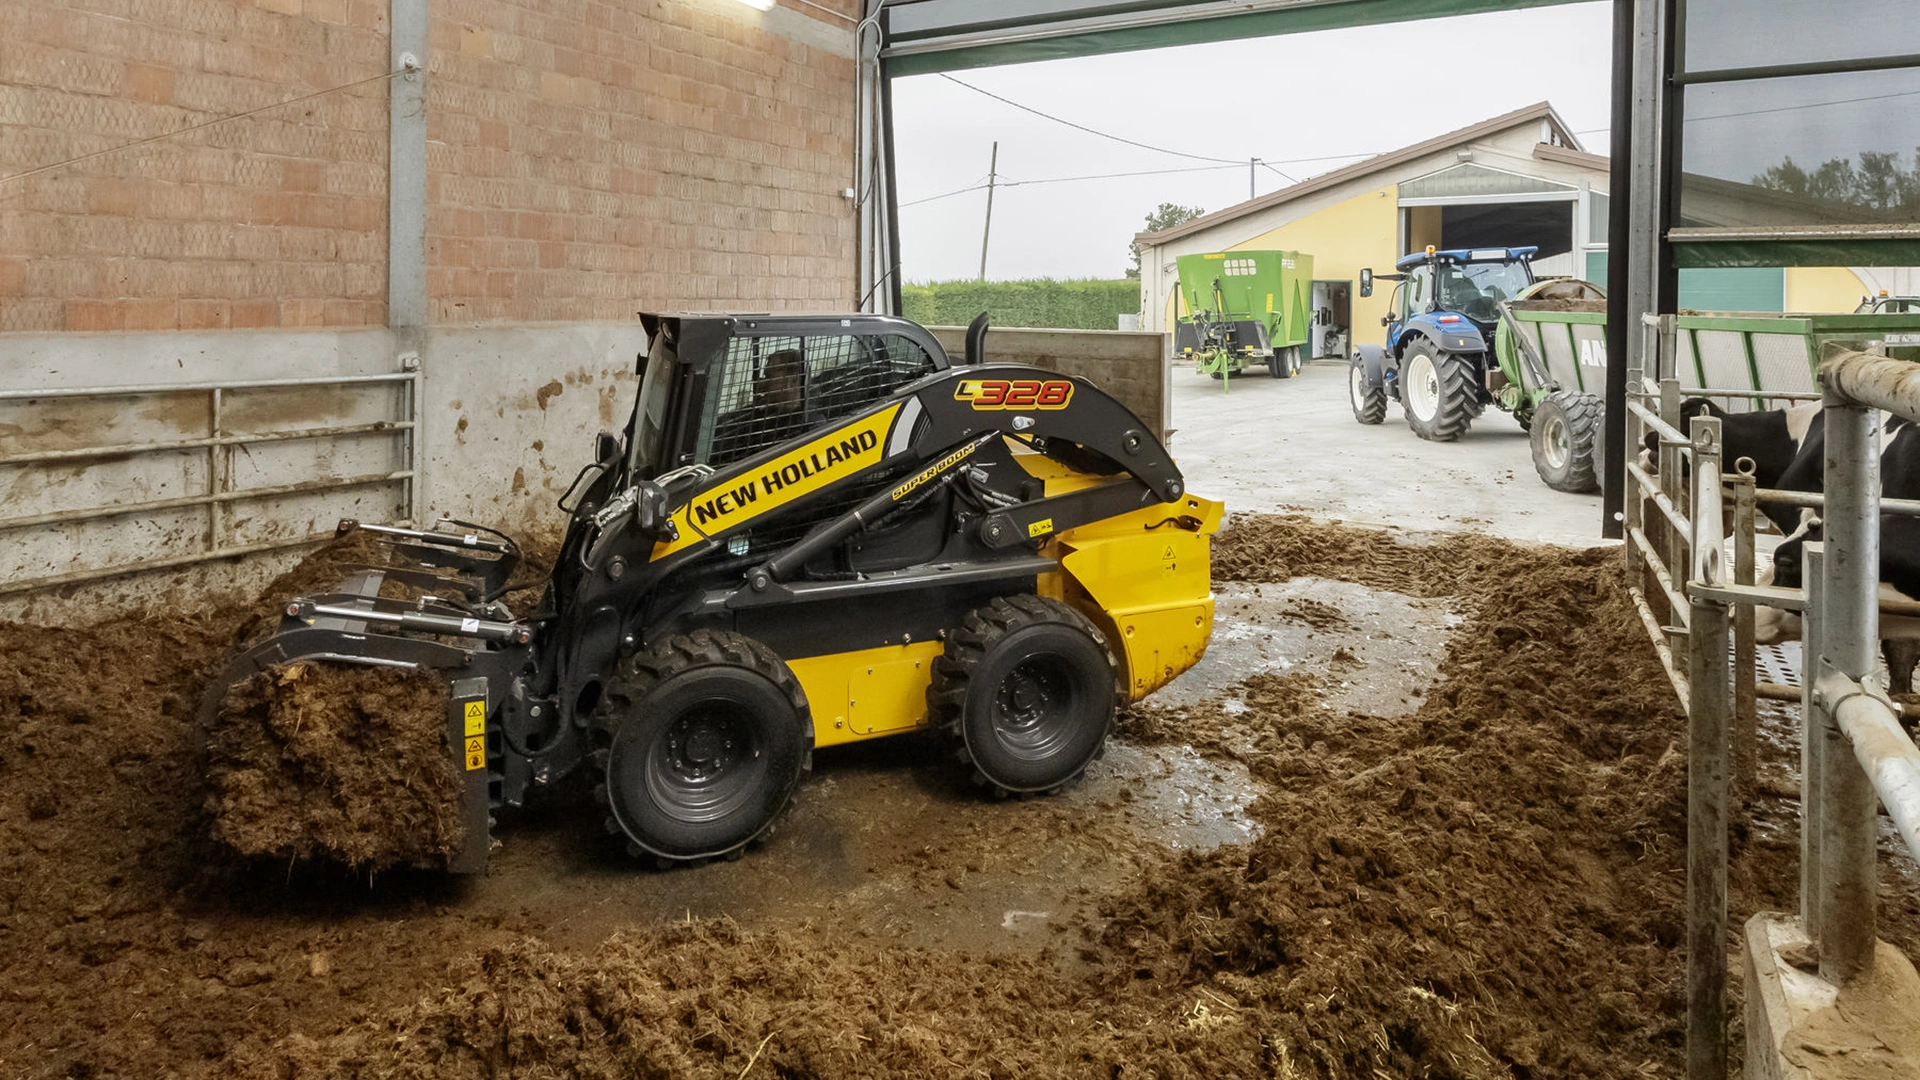 New Holland skid steer loader in barn, moving soil with claw attachment against brick wall backdrop.